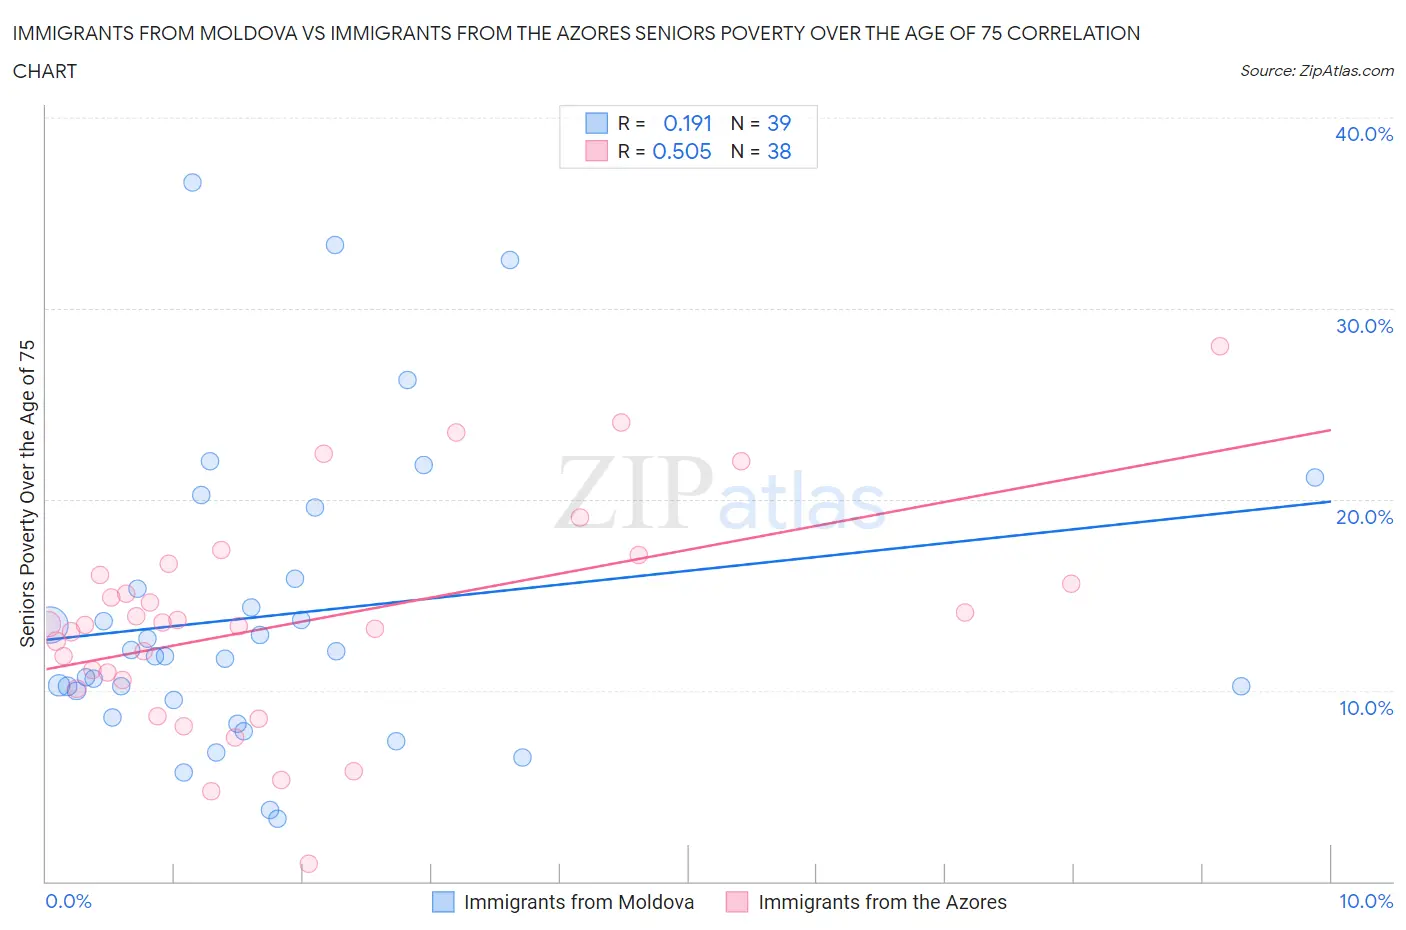 Immigrants from Moldova vs Immigrants from the Azores Seniors Poverty Over the Age of 75